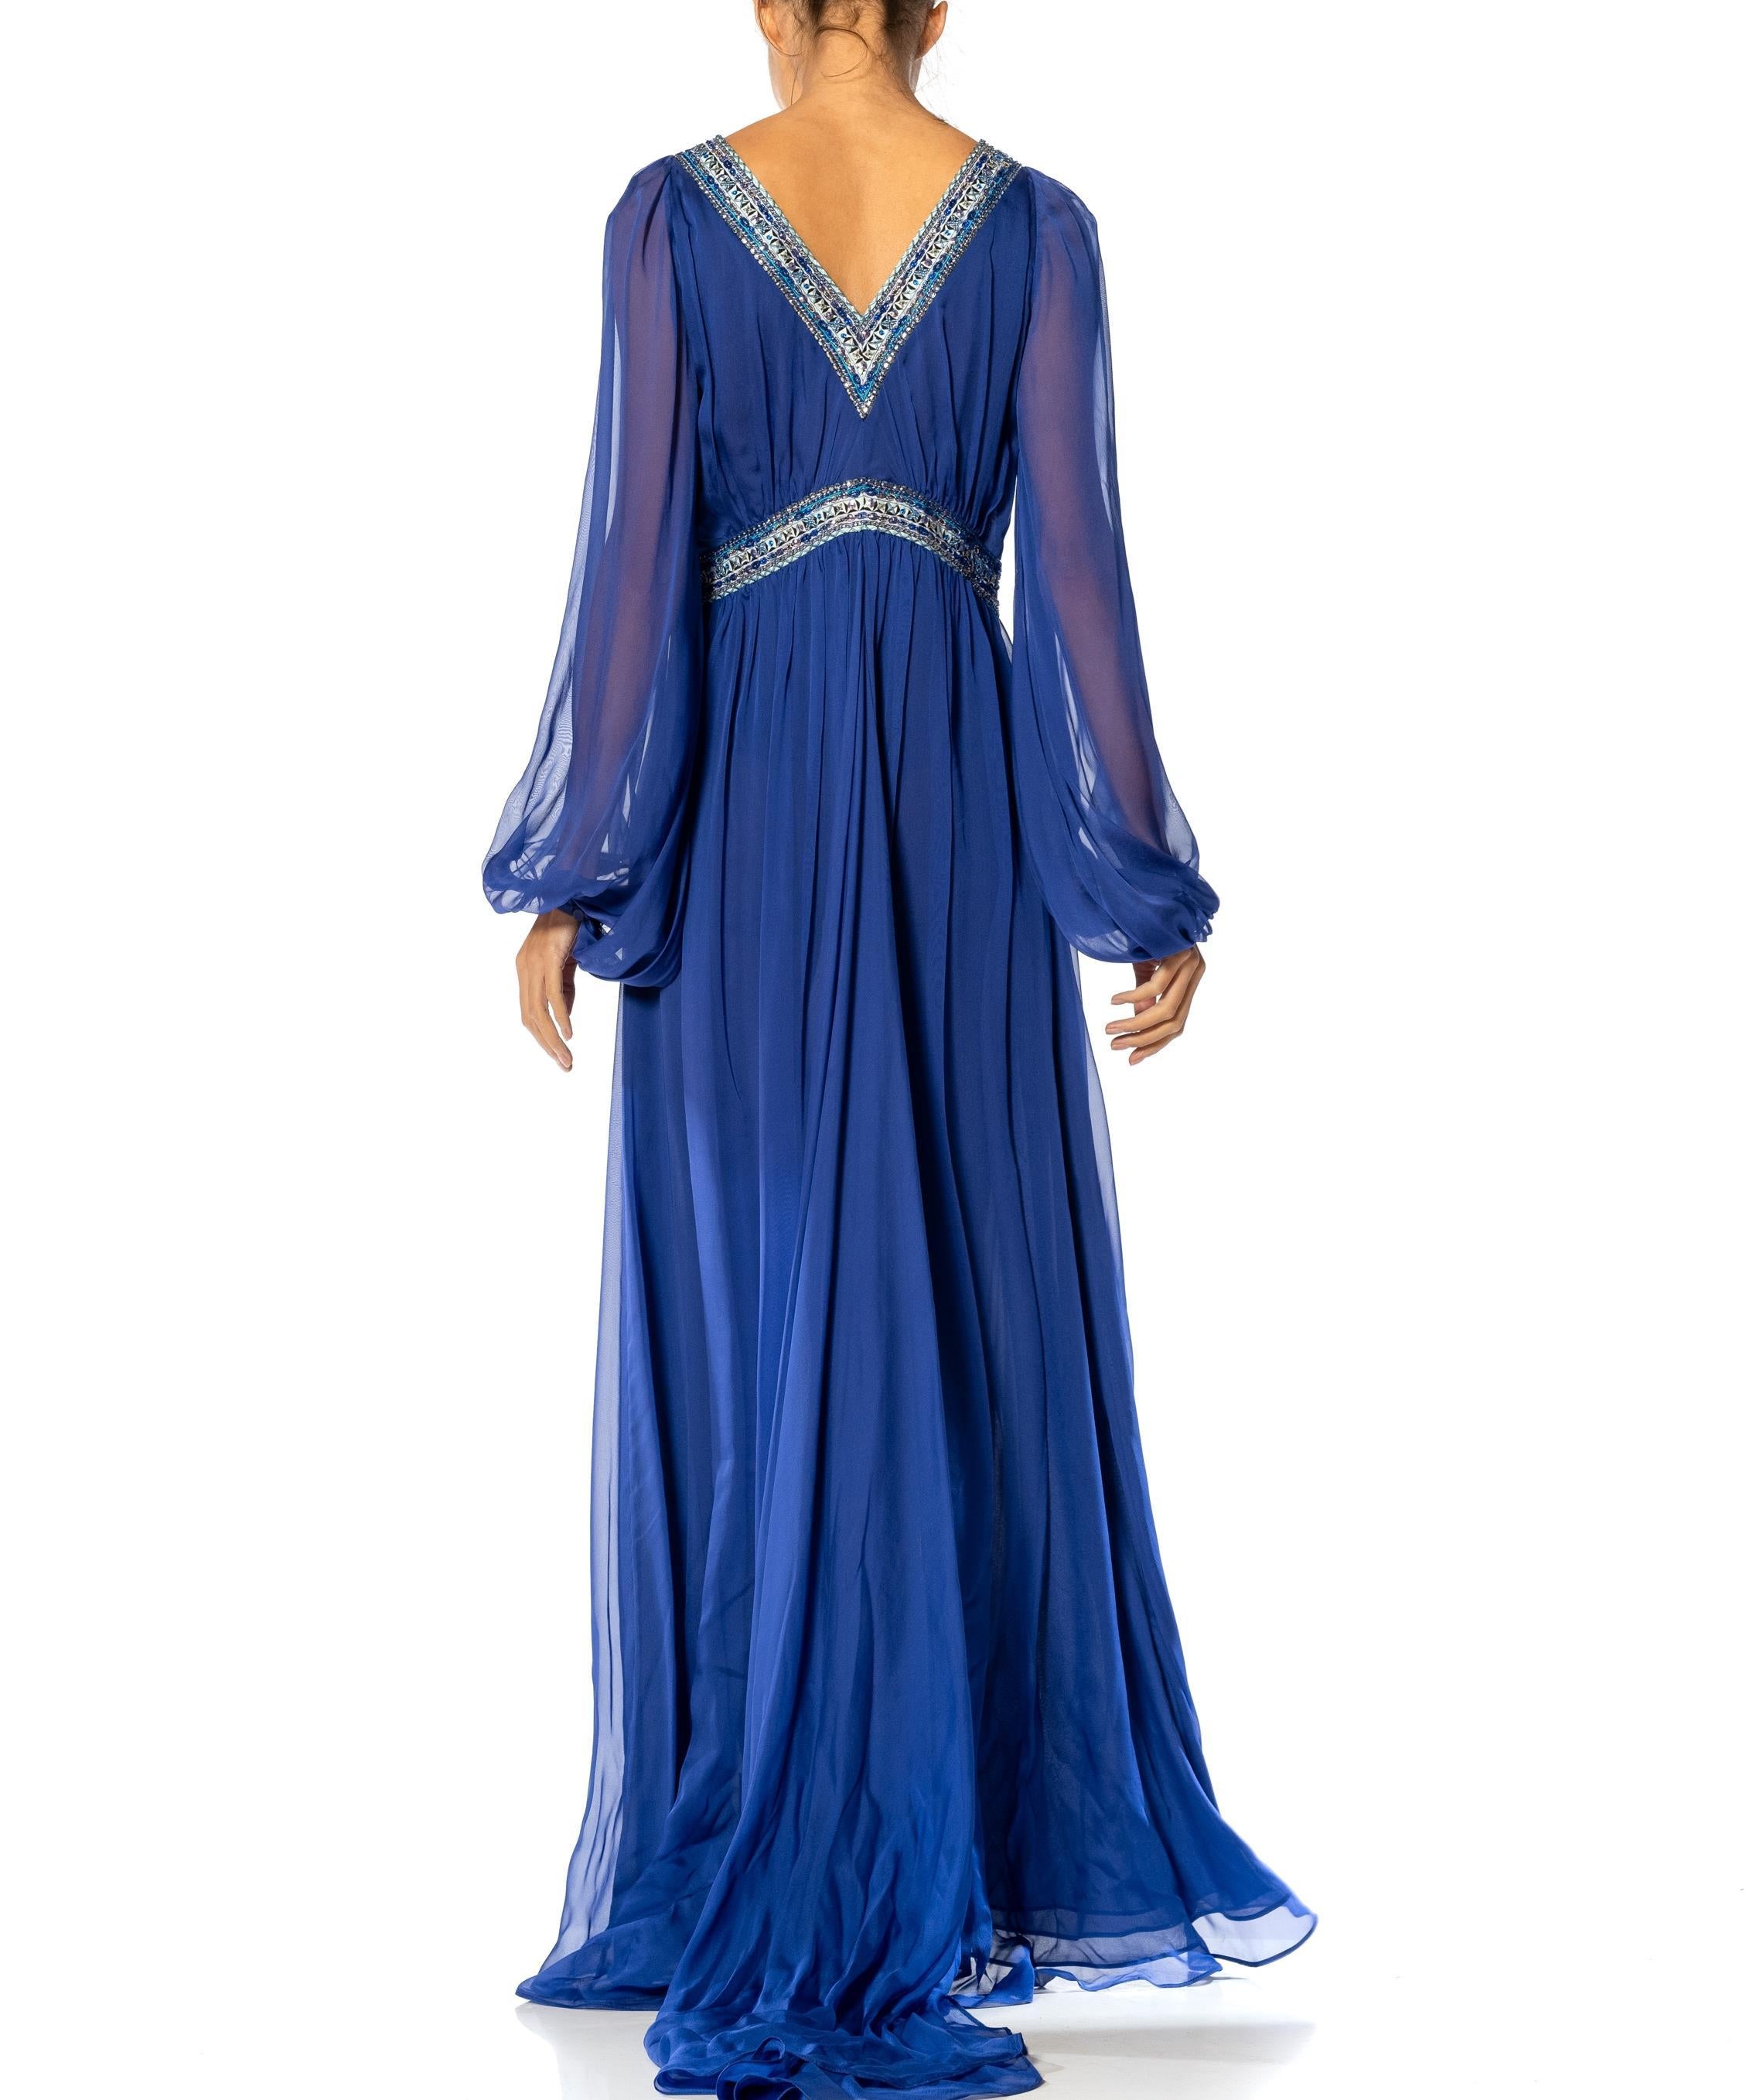 2000S EMILIO PUCCI Cobalt Blue Silk Chiffon Sleeved Gown With Beaded Print Deta For Sale 4